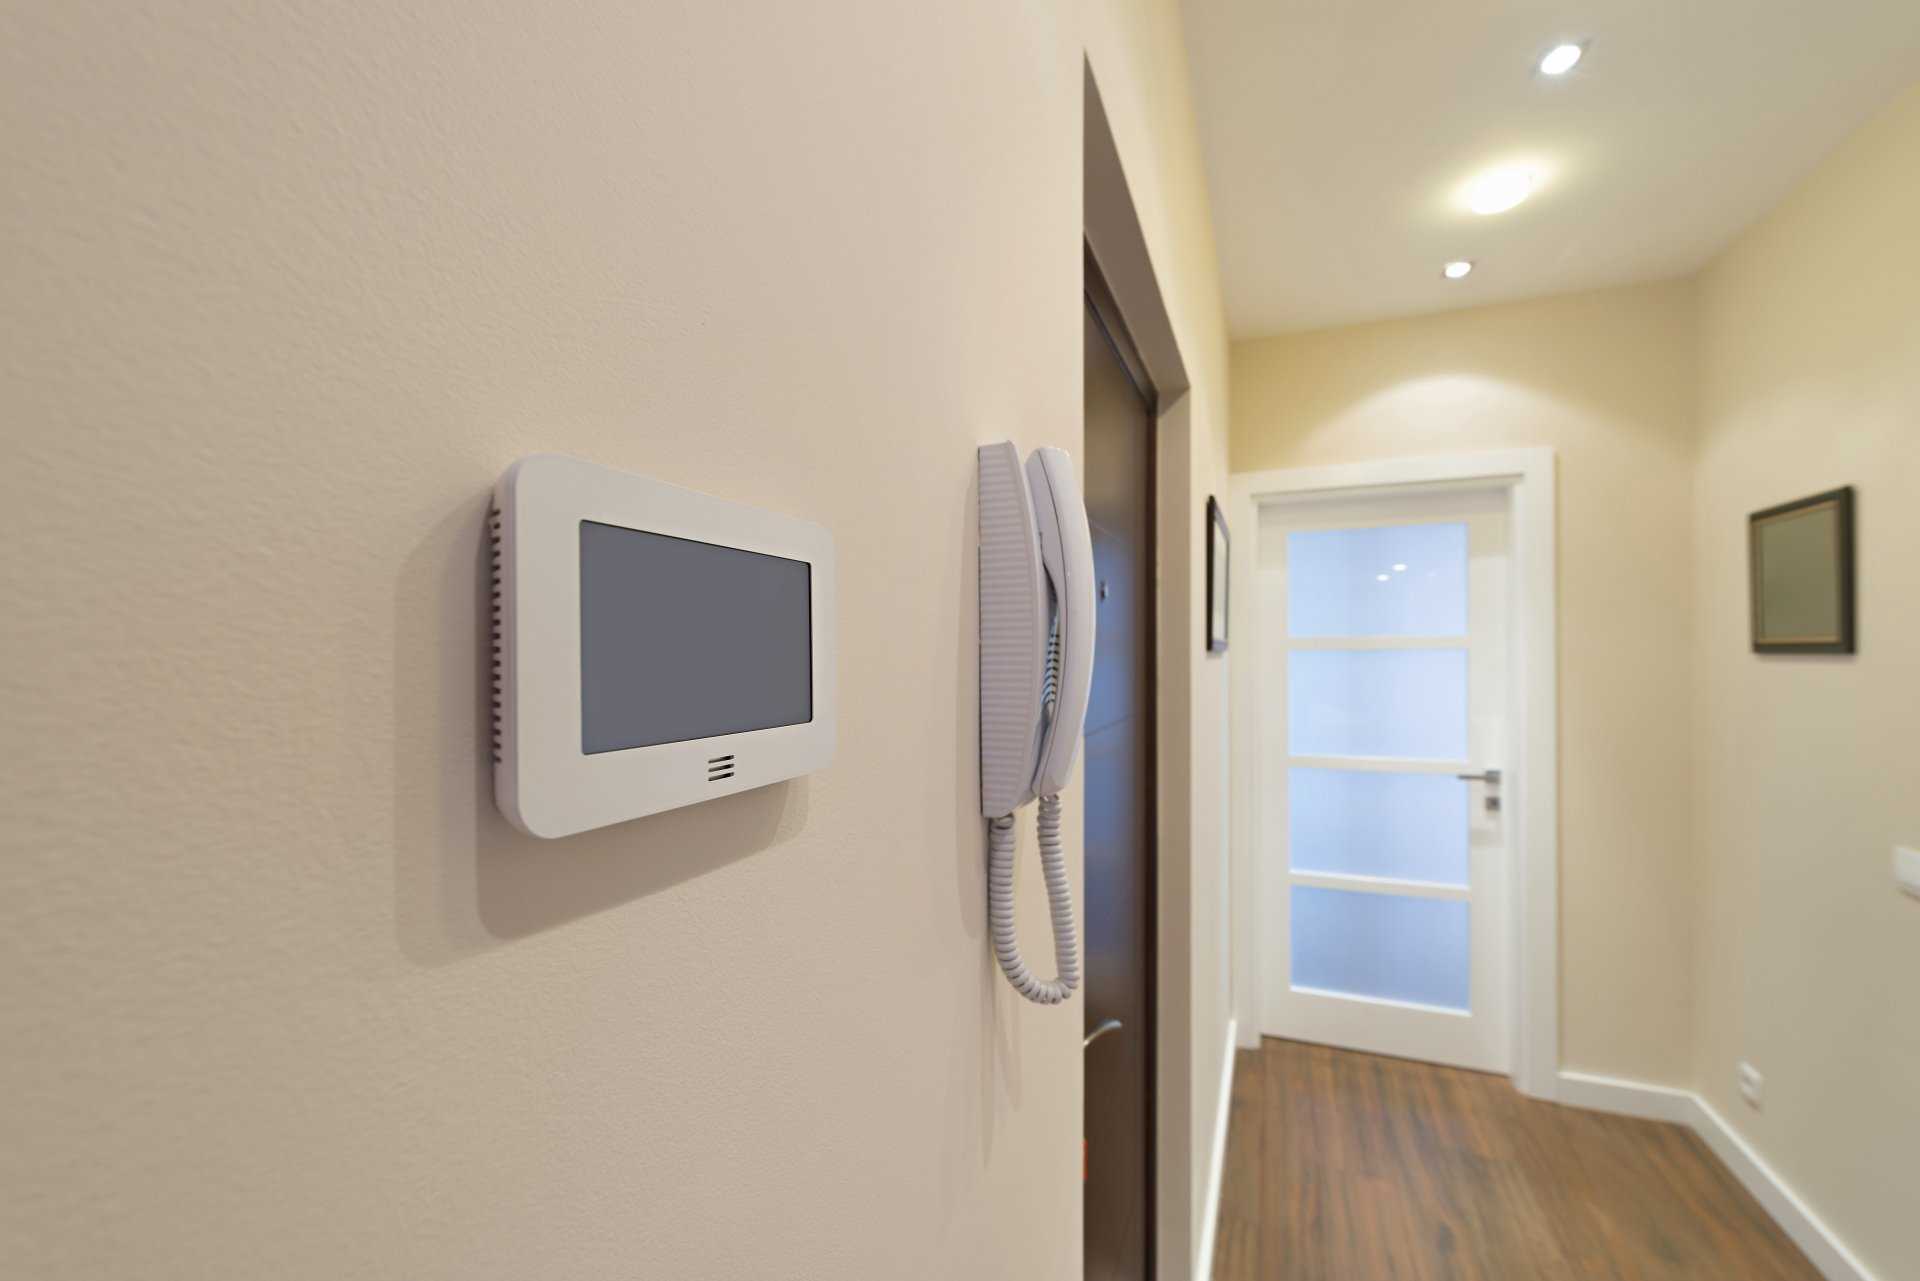 Home access control screen and phone — Access Control in Forster NSW